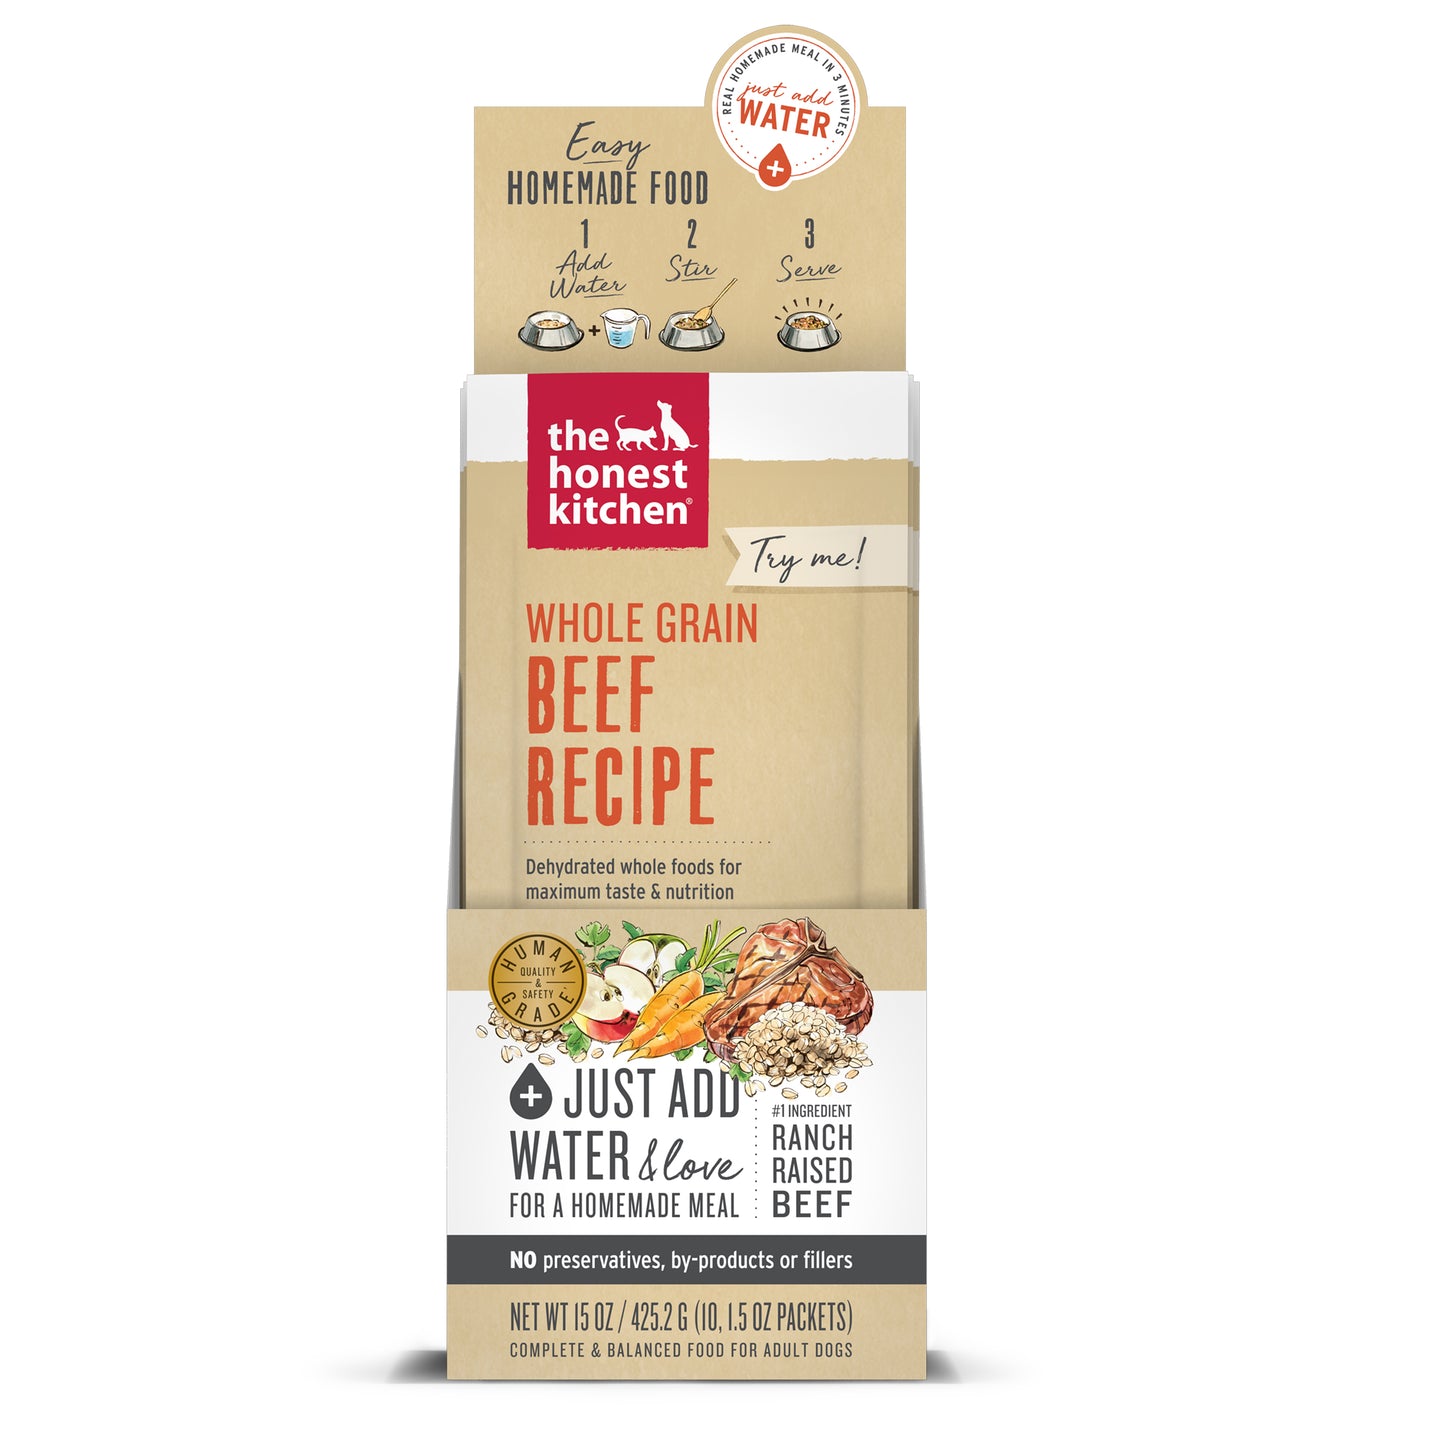 Dehydrated Whole Grain Beef